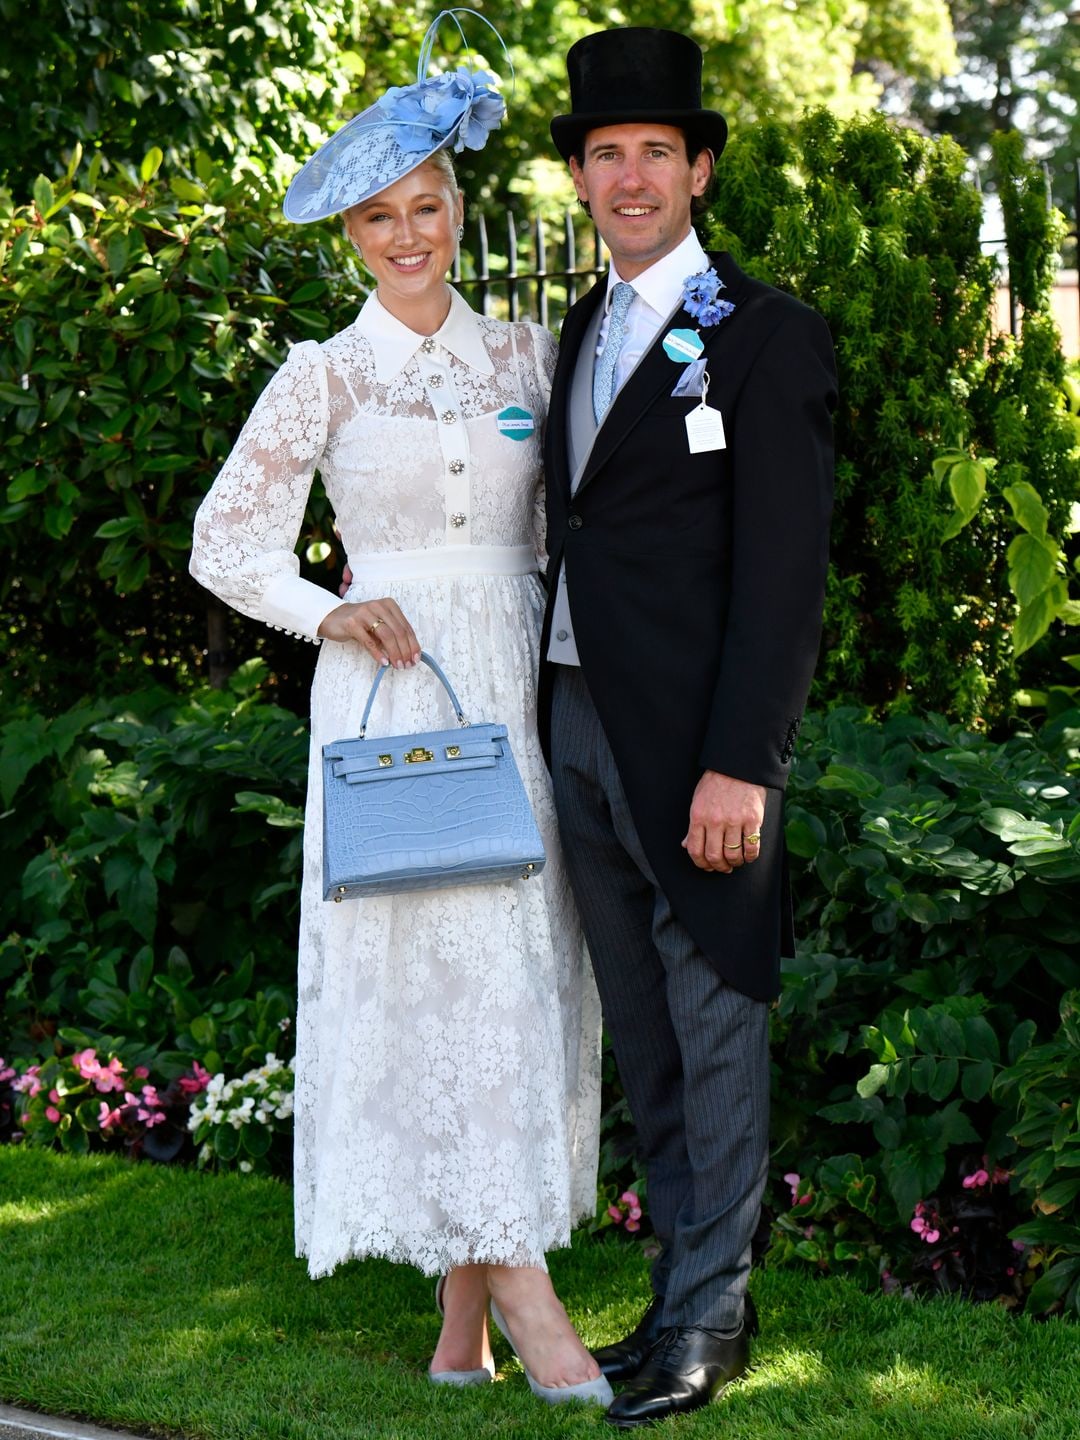 Leonora Smee, pictured with Mark Cosgrove-Smith, attended day four of Royal Ascot wearing an LK Bennett dress, jewellery from Tivon, a Vivien Sheriff hat, Lalage Beaumont Handbag and Christian Louboutin heels.